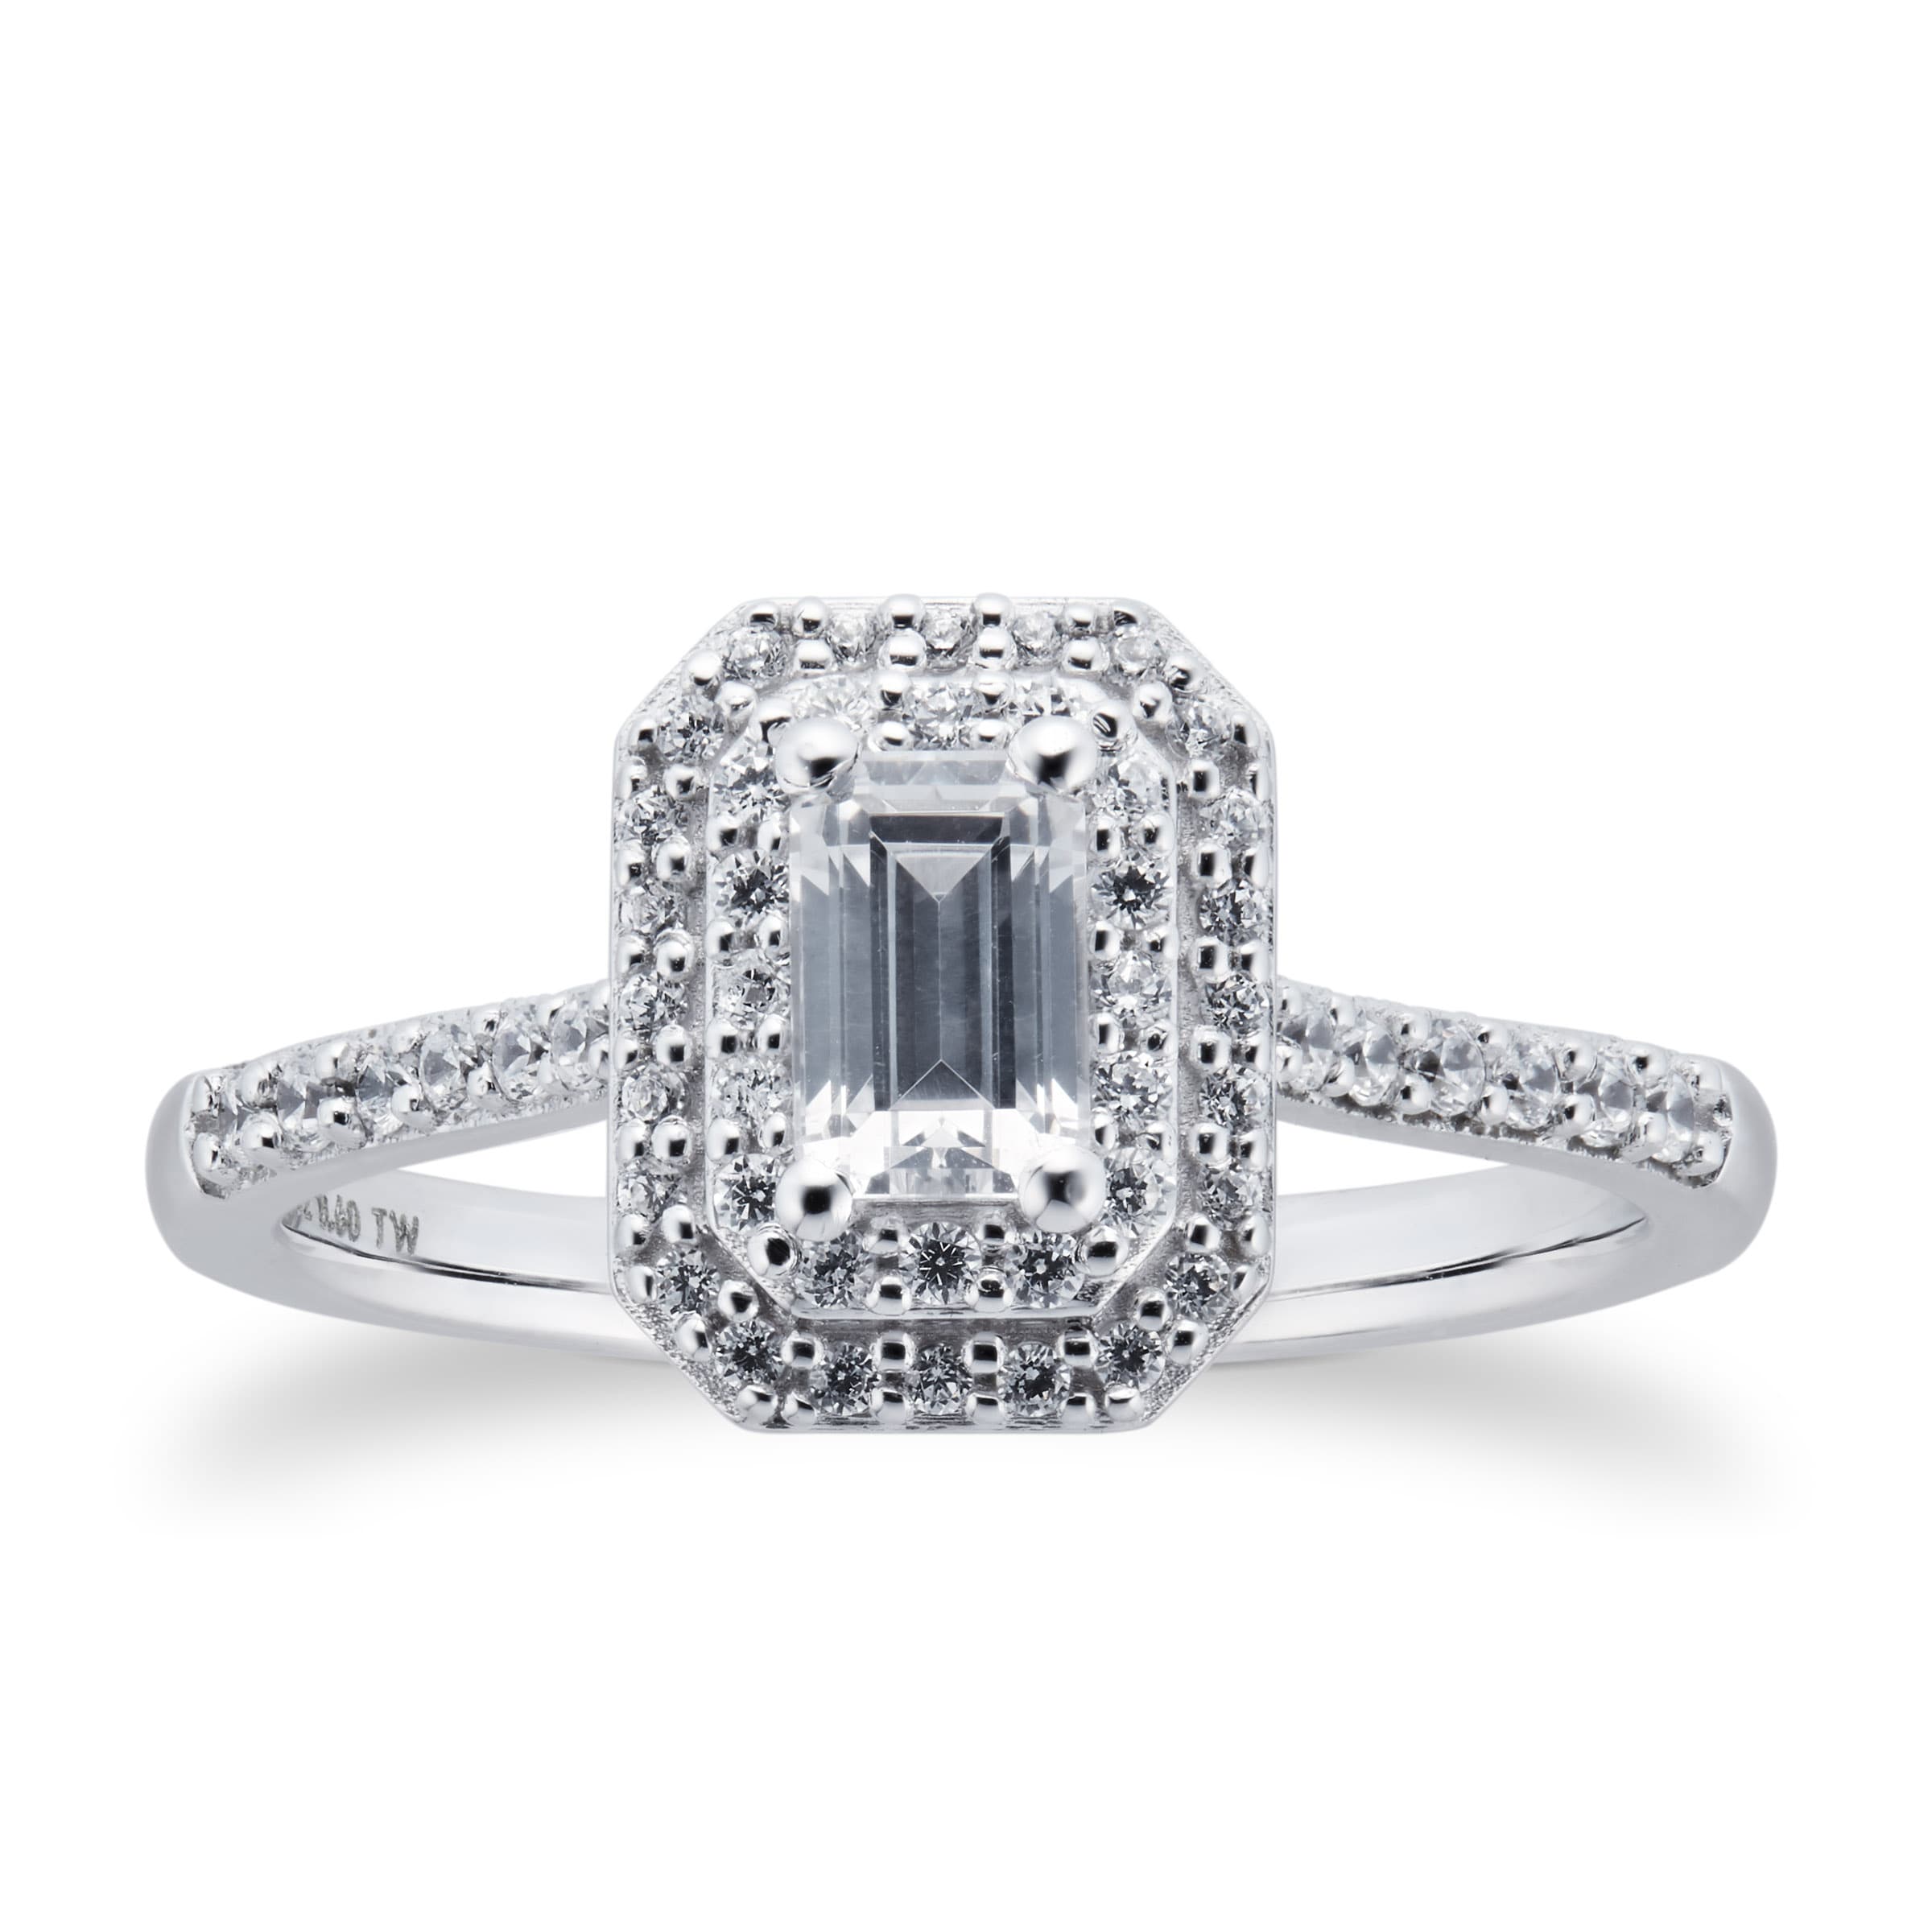 18ct White Gold 0.60cttw Diamond Emerald Cut Double Halo Ring